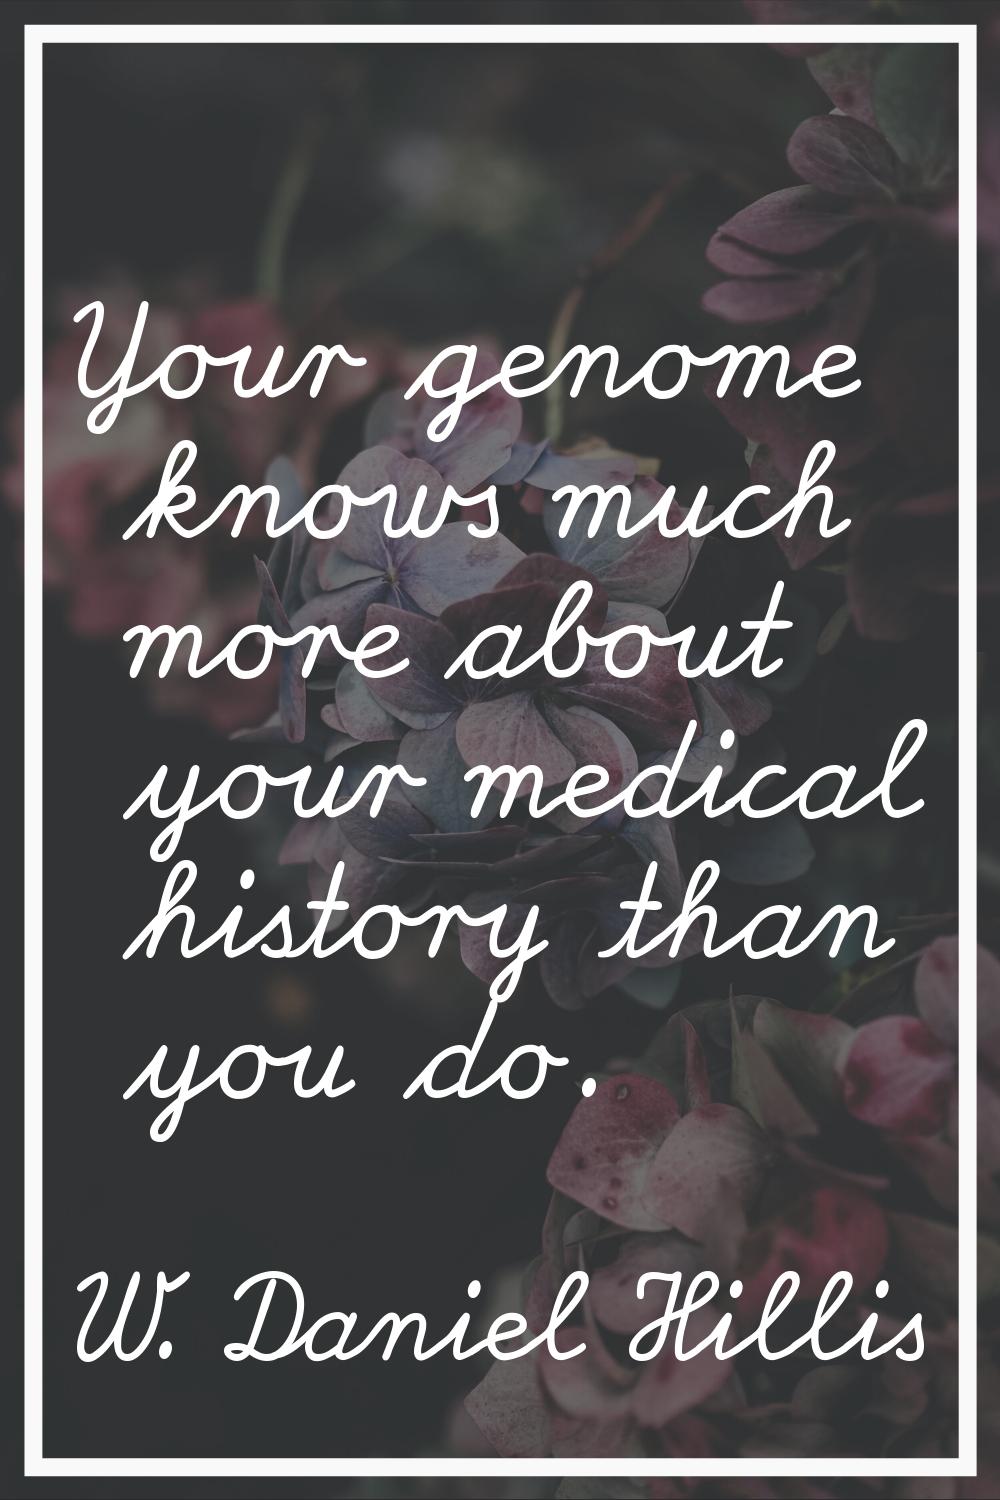 Your genome knows much more about your medical history than you do.